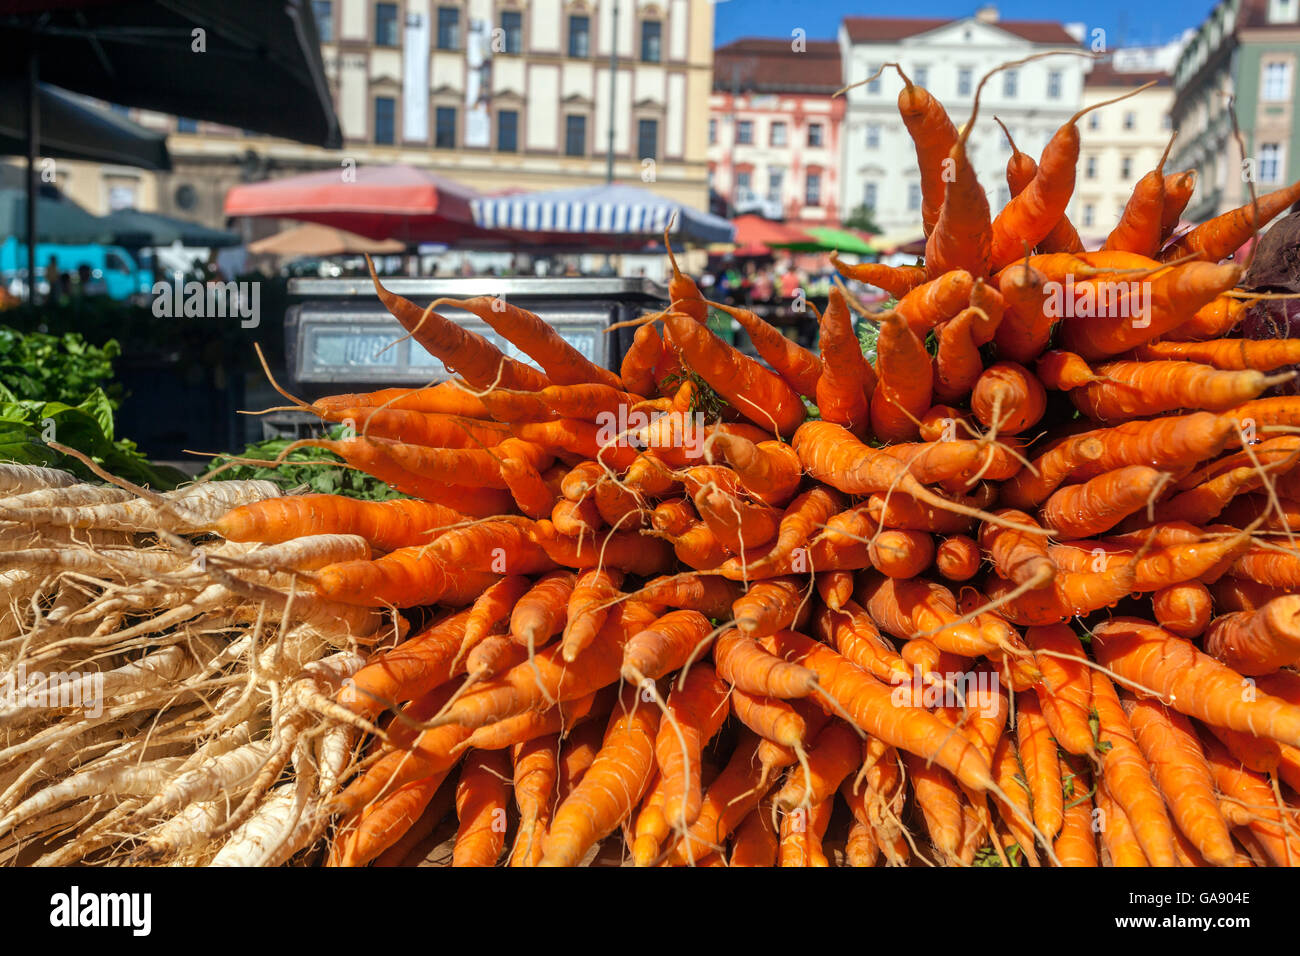 Zelny trh - square, Cabbage Market square is traditional markets with fruits, vegetables, and flowers. Brno, South Moravia, Czech Republic Marketplace Stock Photo